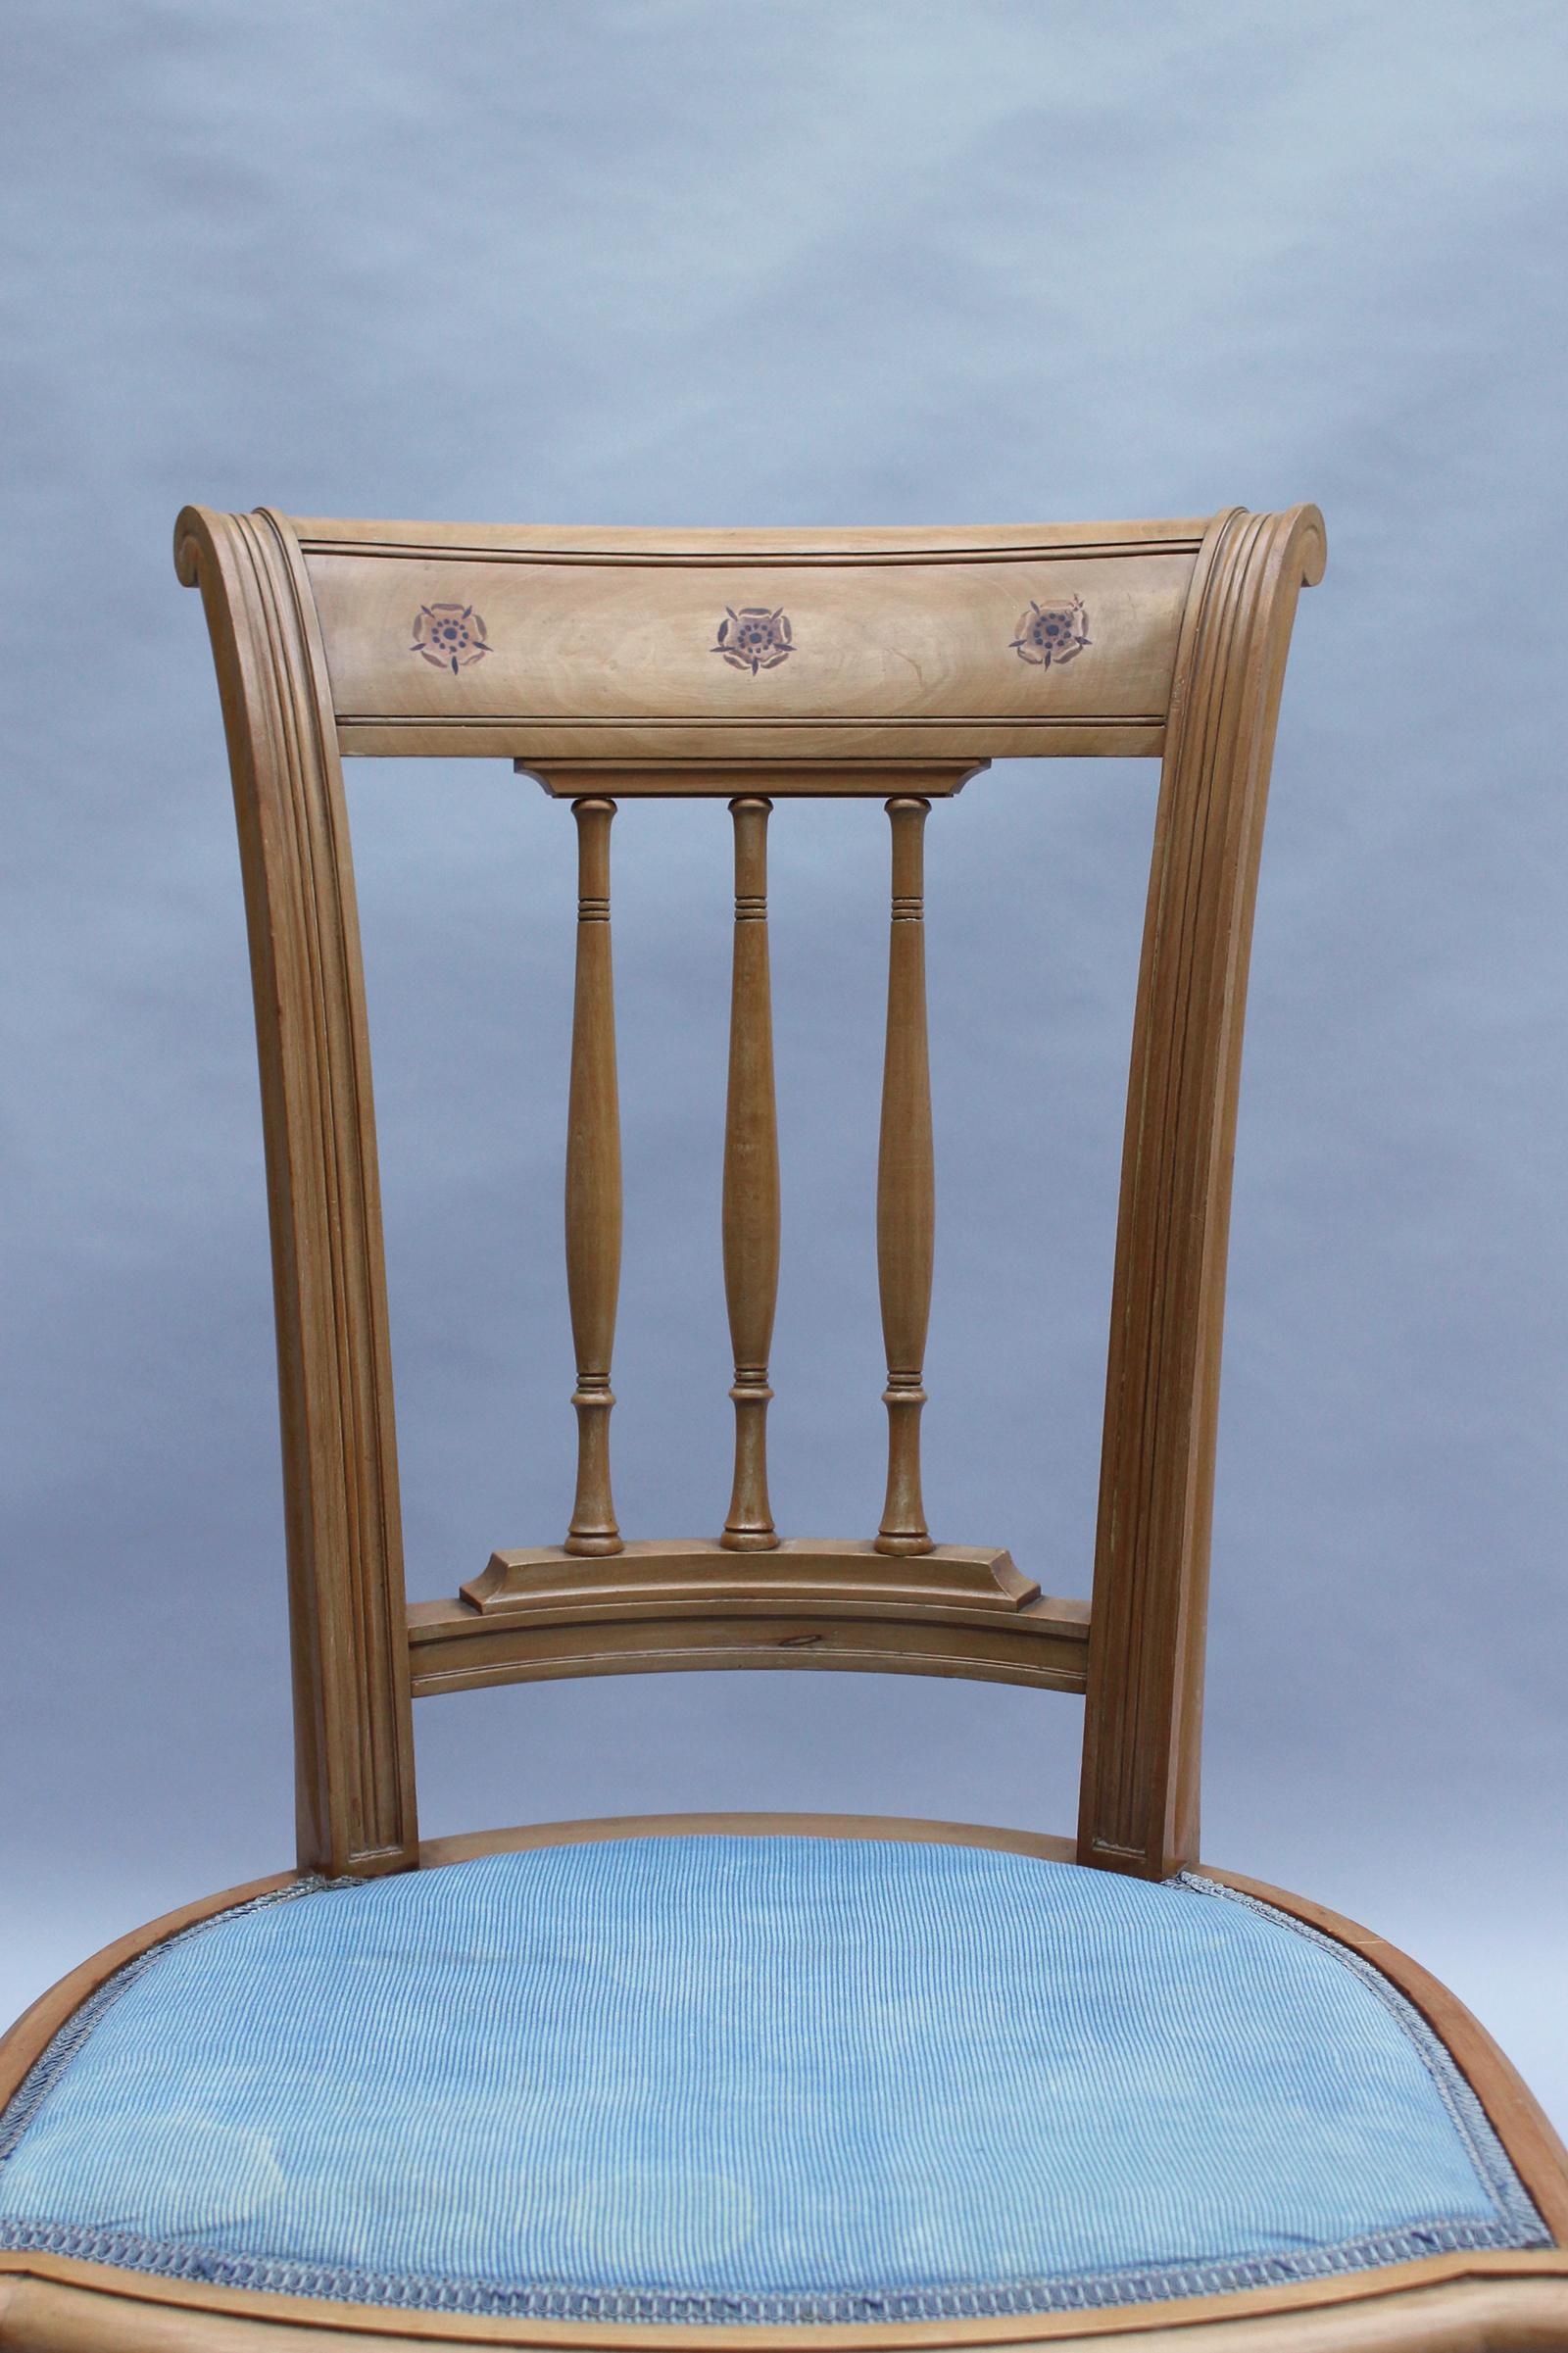 2 Fine French Art Deco Chairs by R. Damon & Bertaux For Sale 6